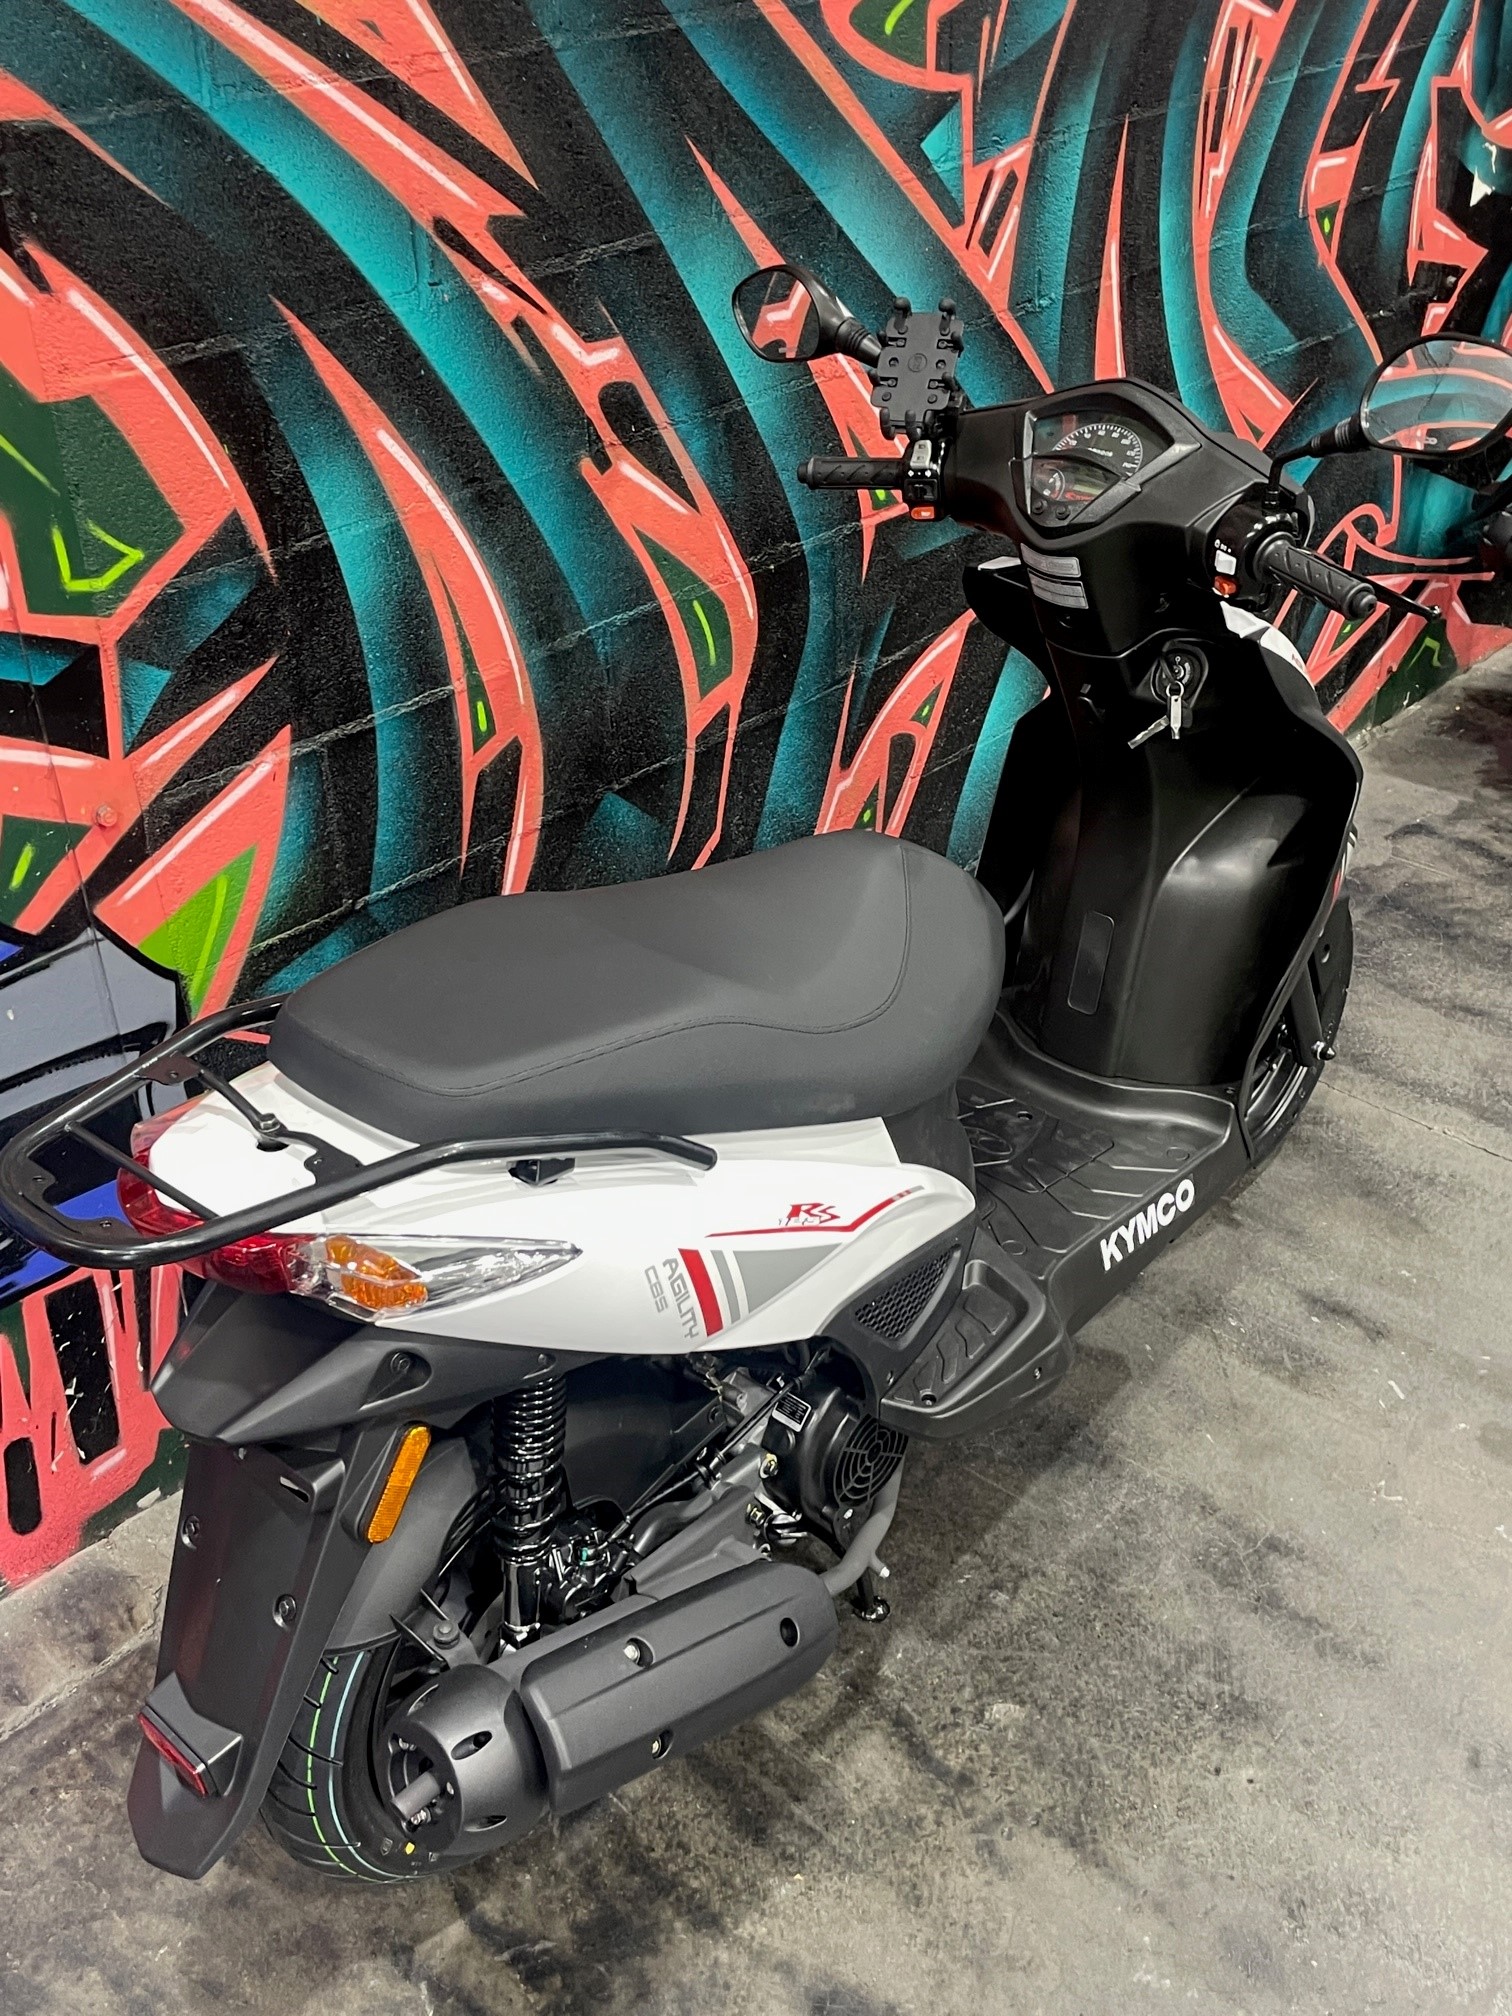 KYMCO  Agility RS125: $3290 ride away until March 31, 2022